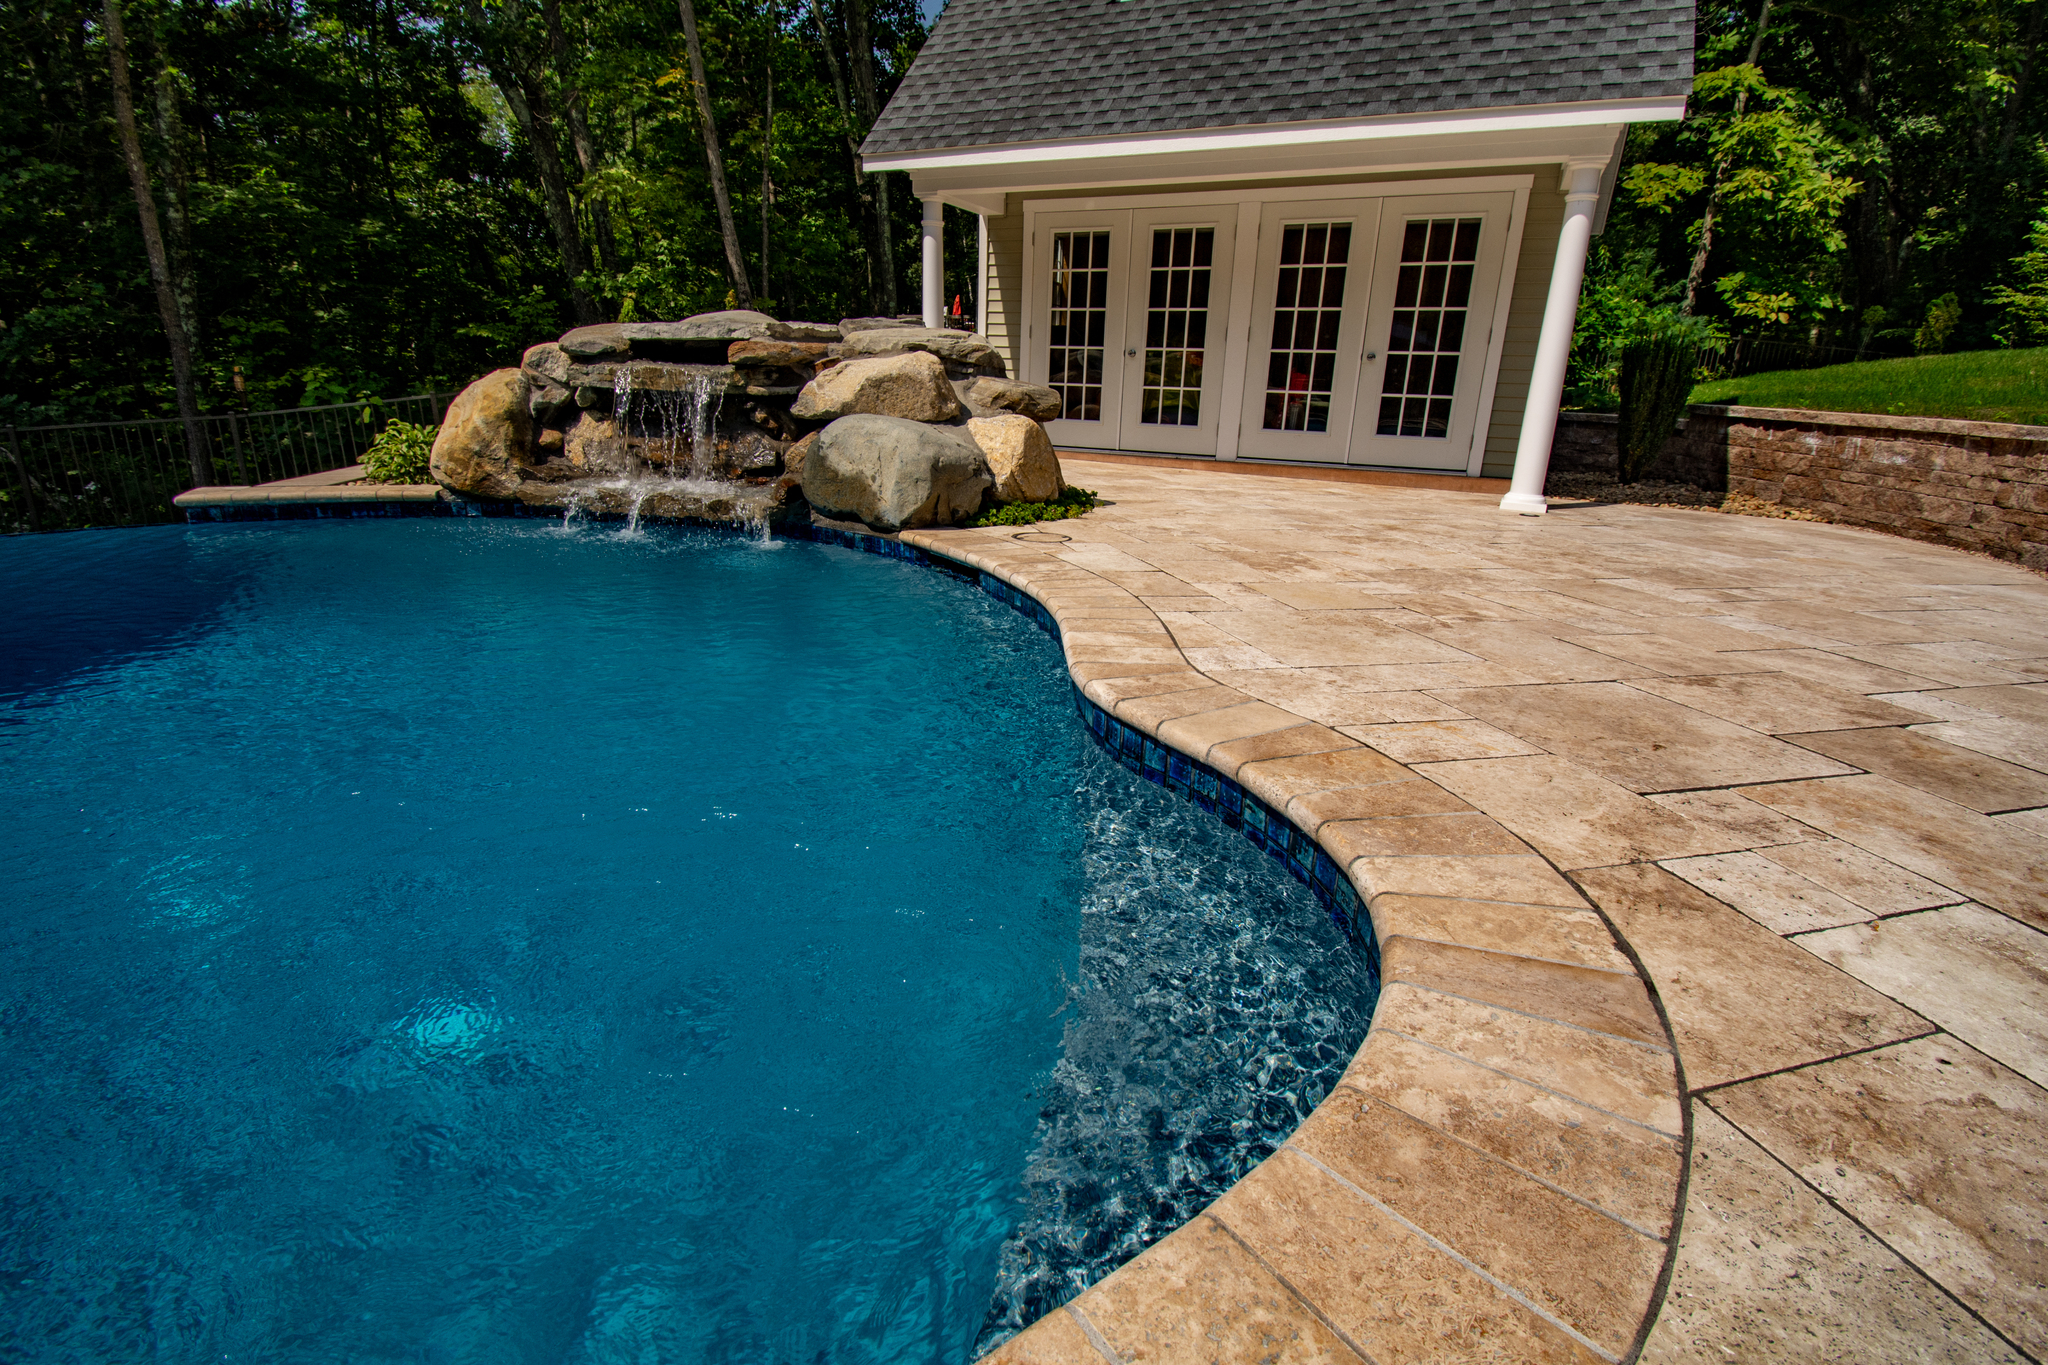 Pool Coping Tile Triad Associates, Tiles For Pool Surrounds